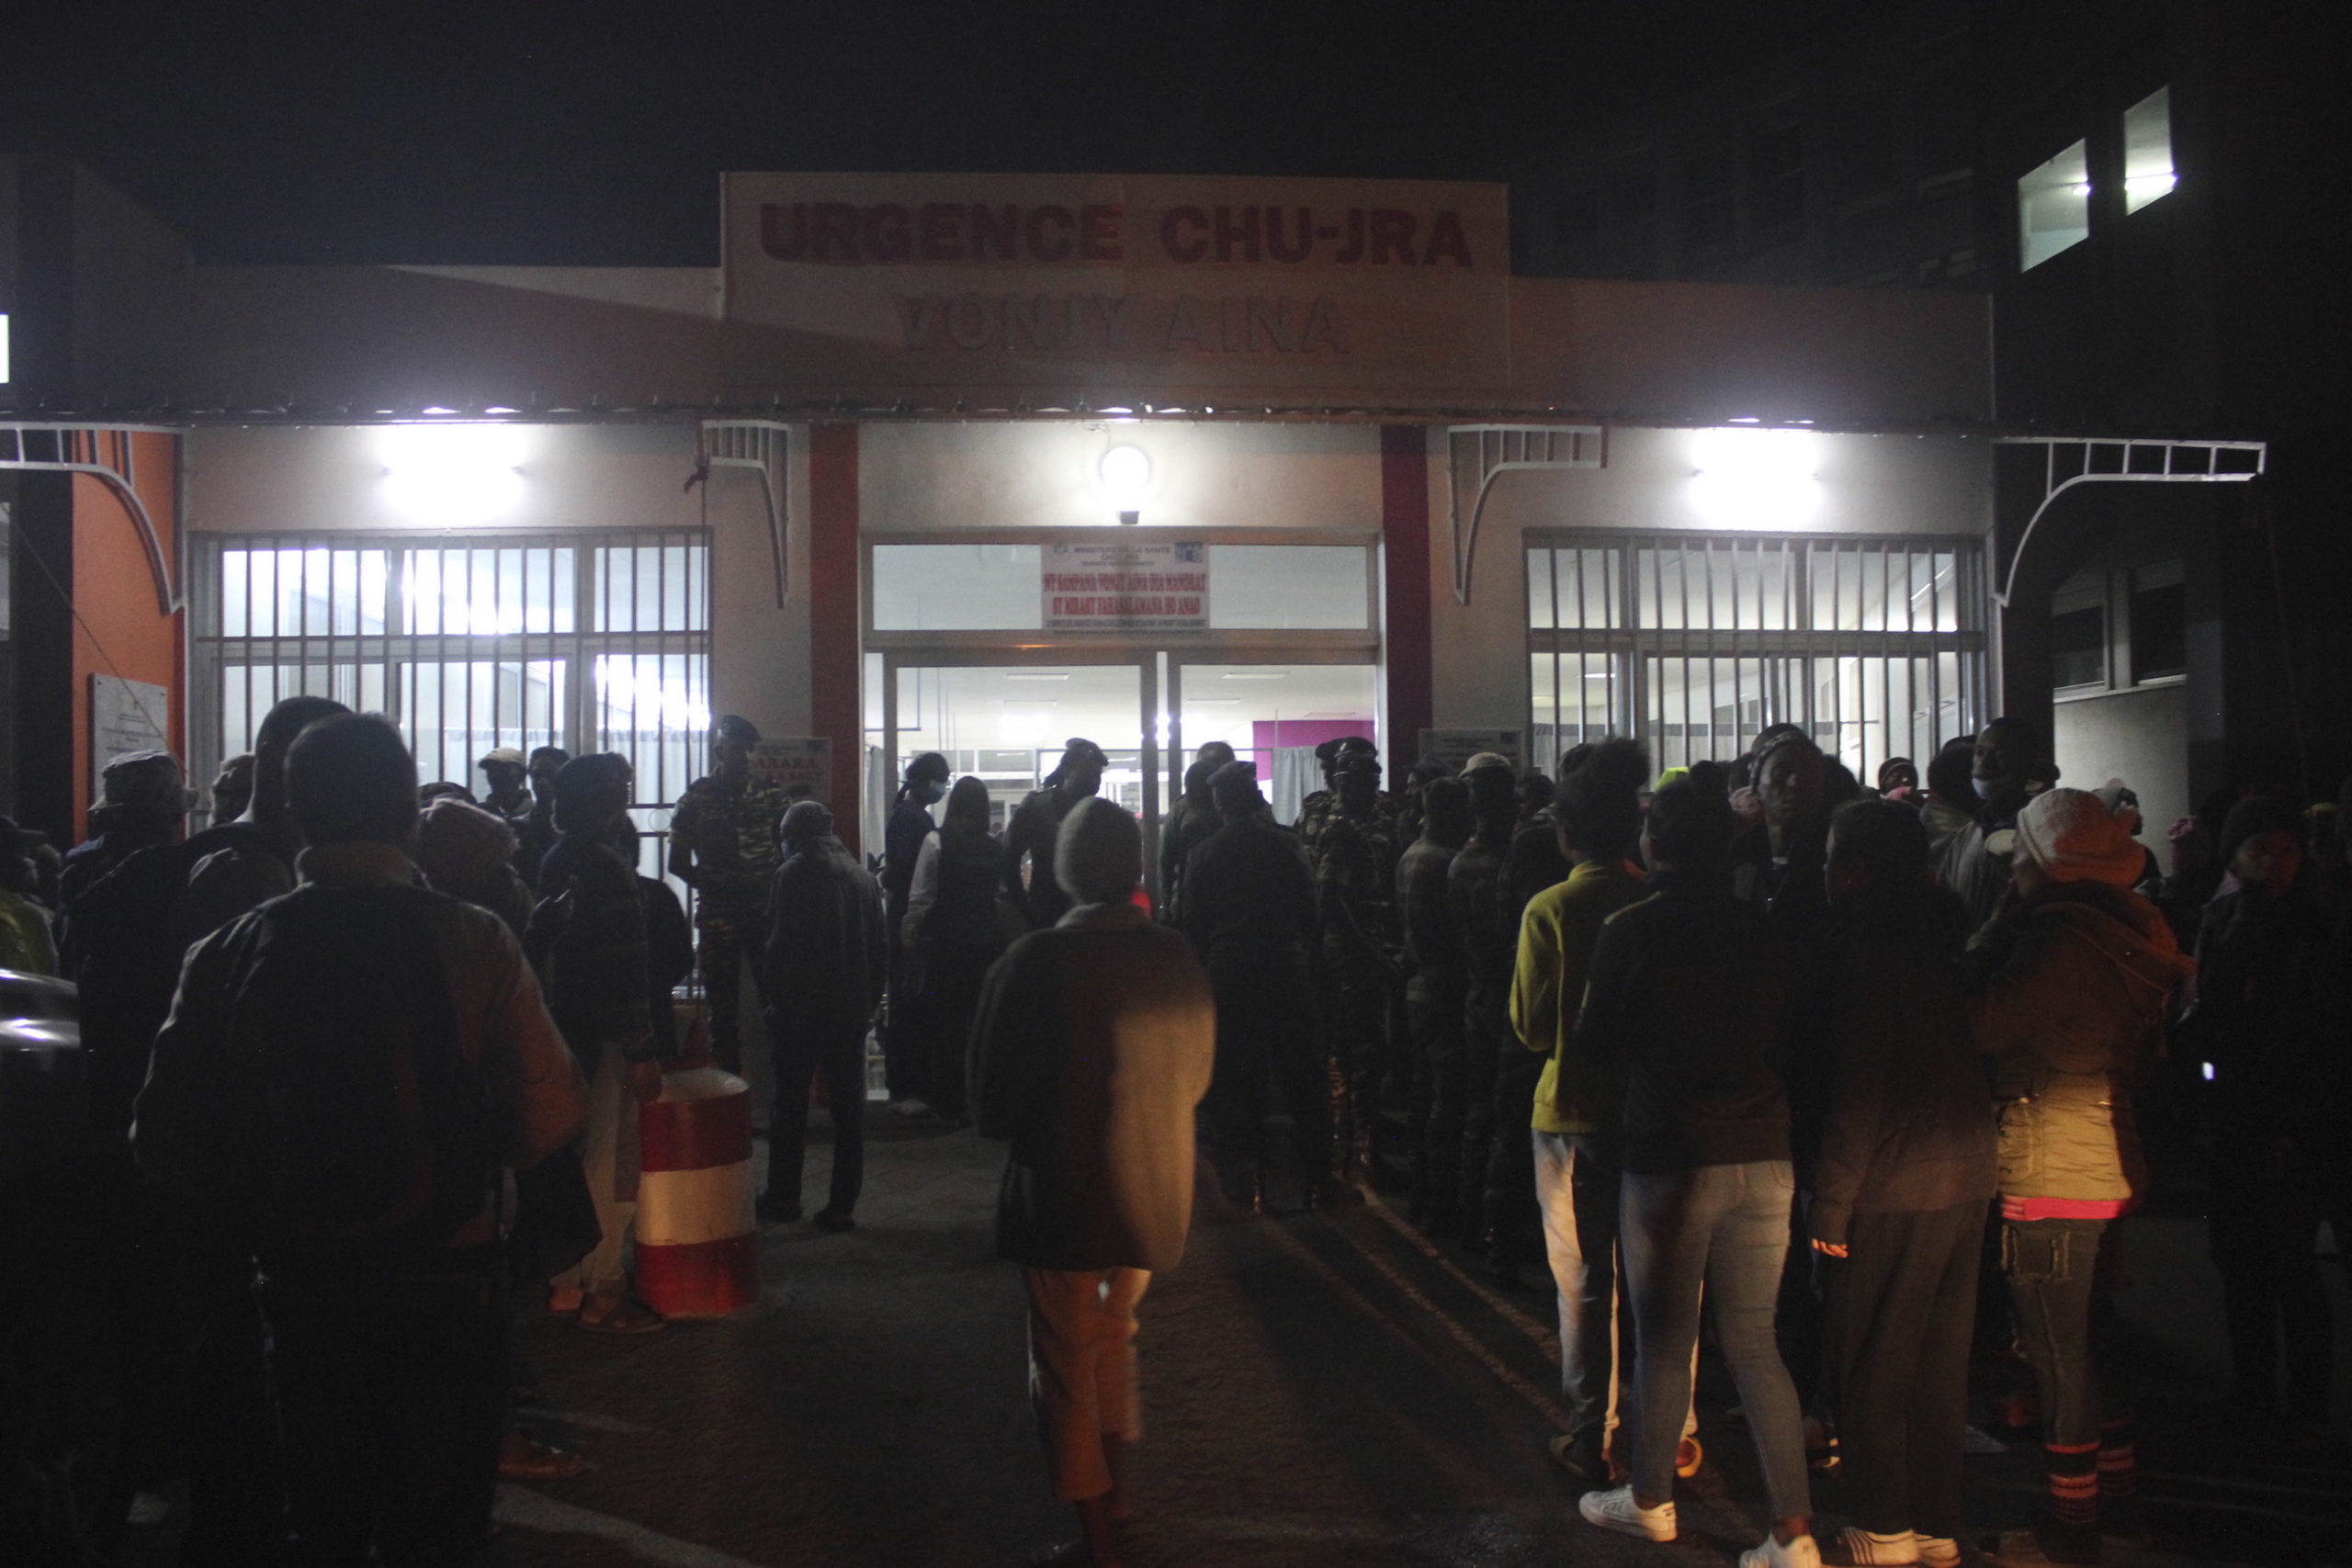 People gather outside a hospital in Antananarivo. Madagascar, on Friday to find out the status of loved ones after a stampede at a local stadium. At least 12 people died in the stampede in the opening ceremony for the Indian Ocean Island Games.